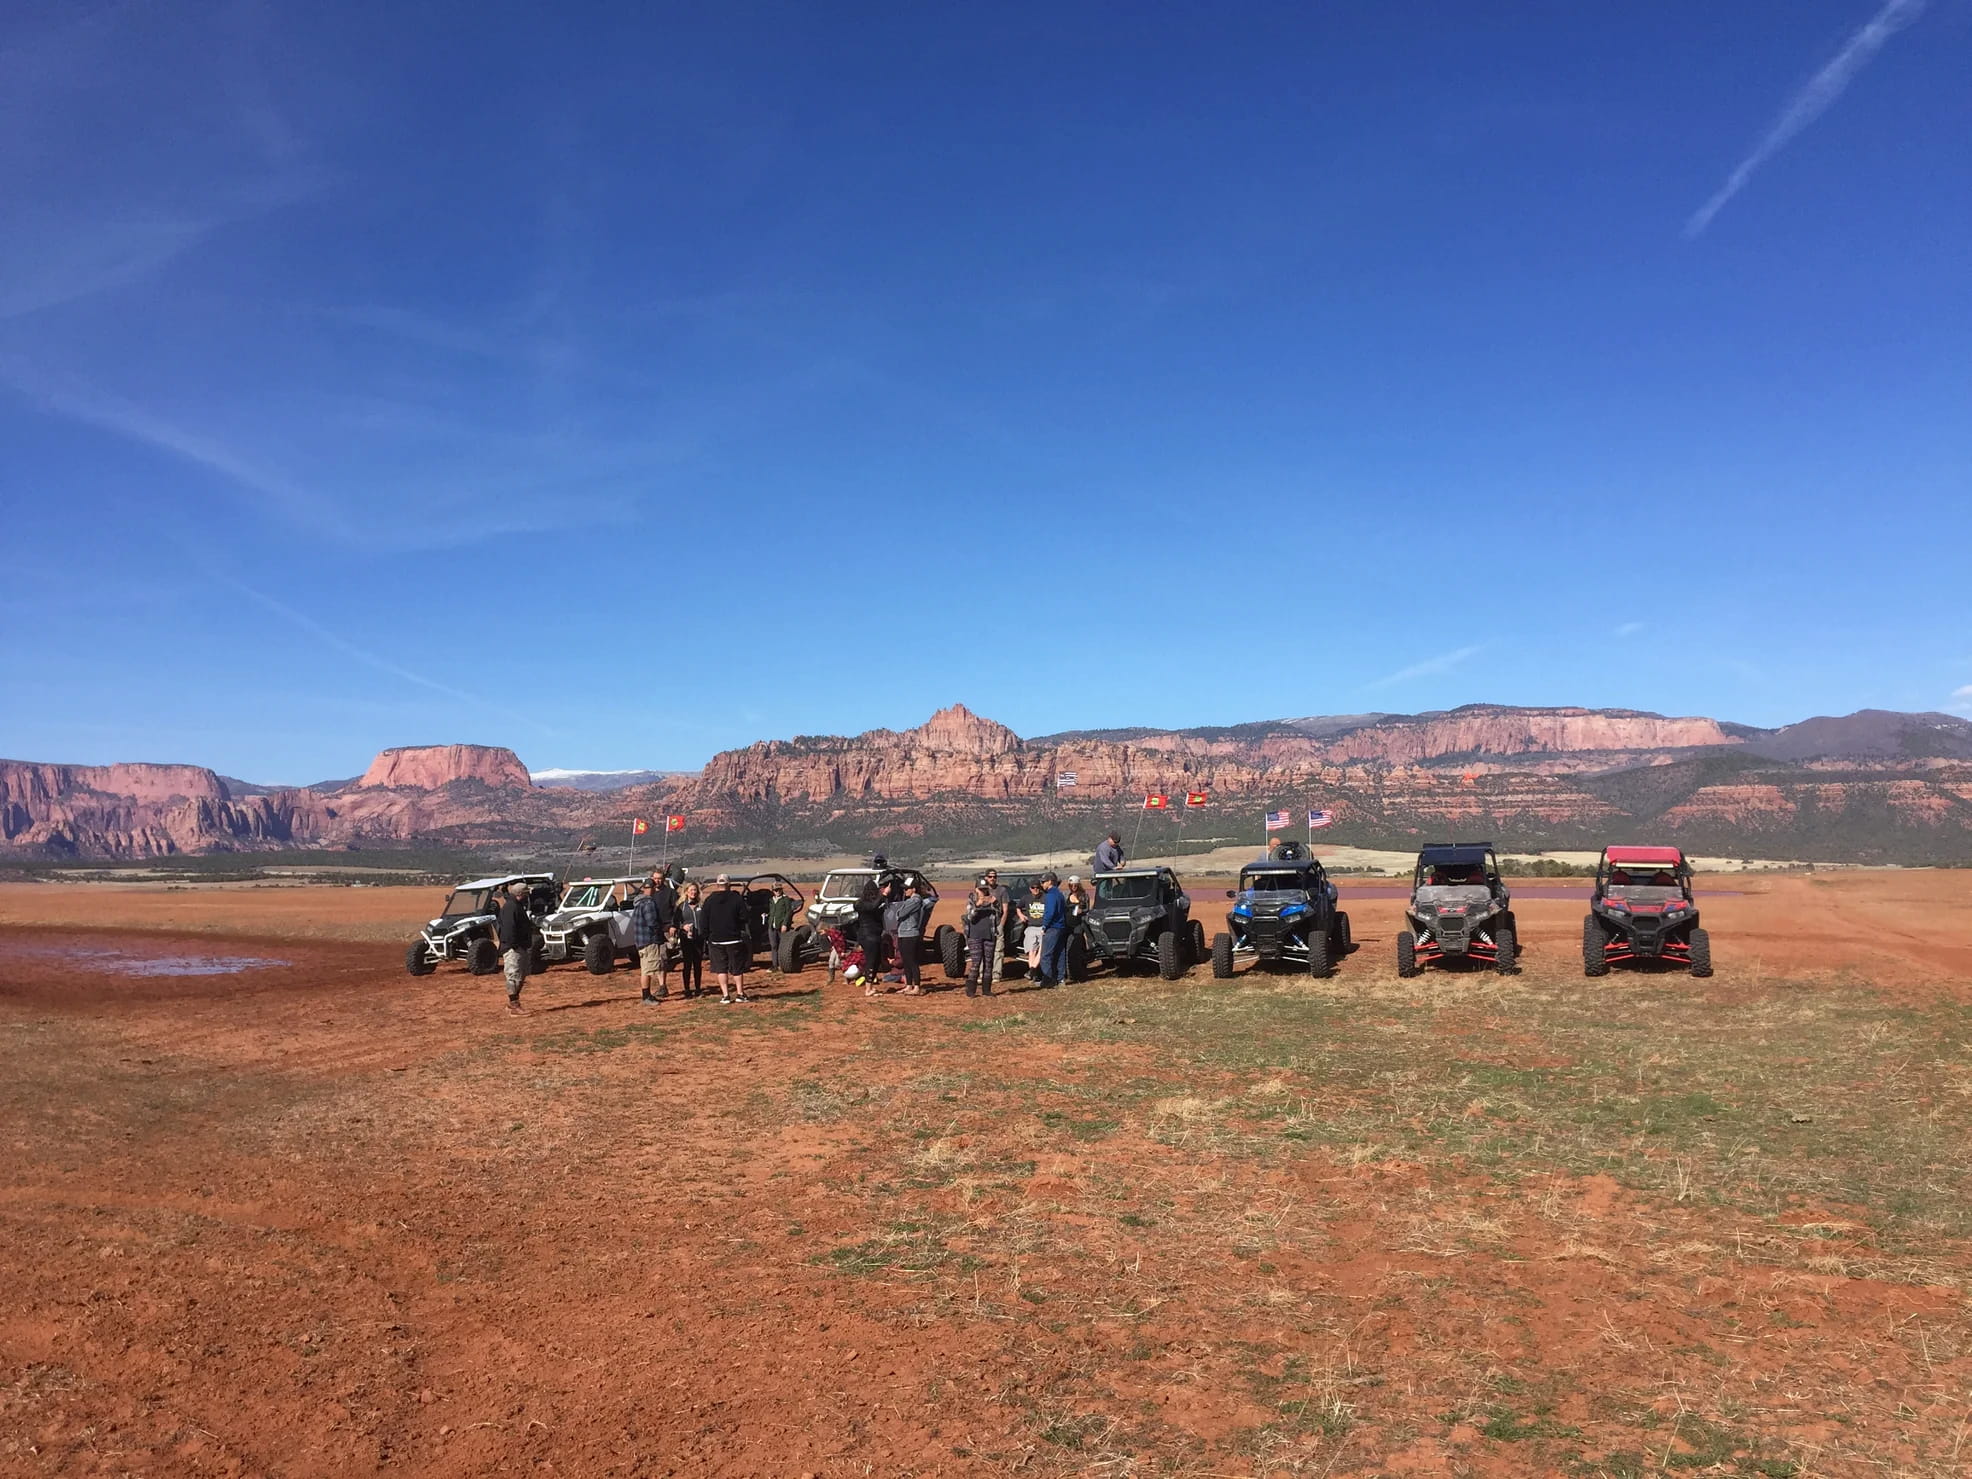 4 runners parked in a line in the desert with mountains in the distance.